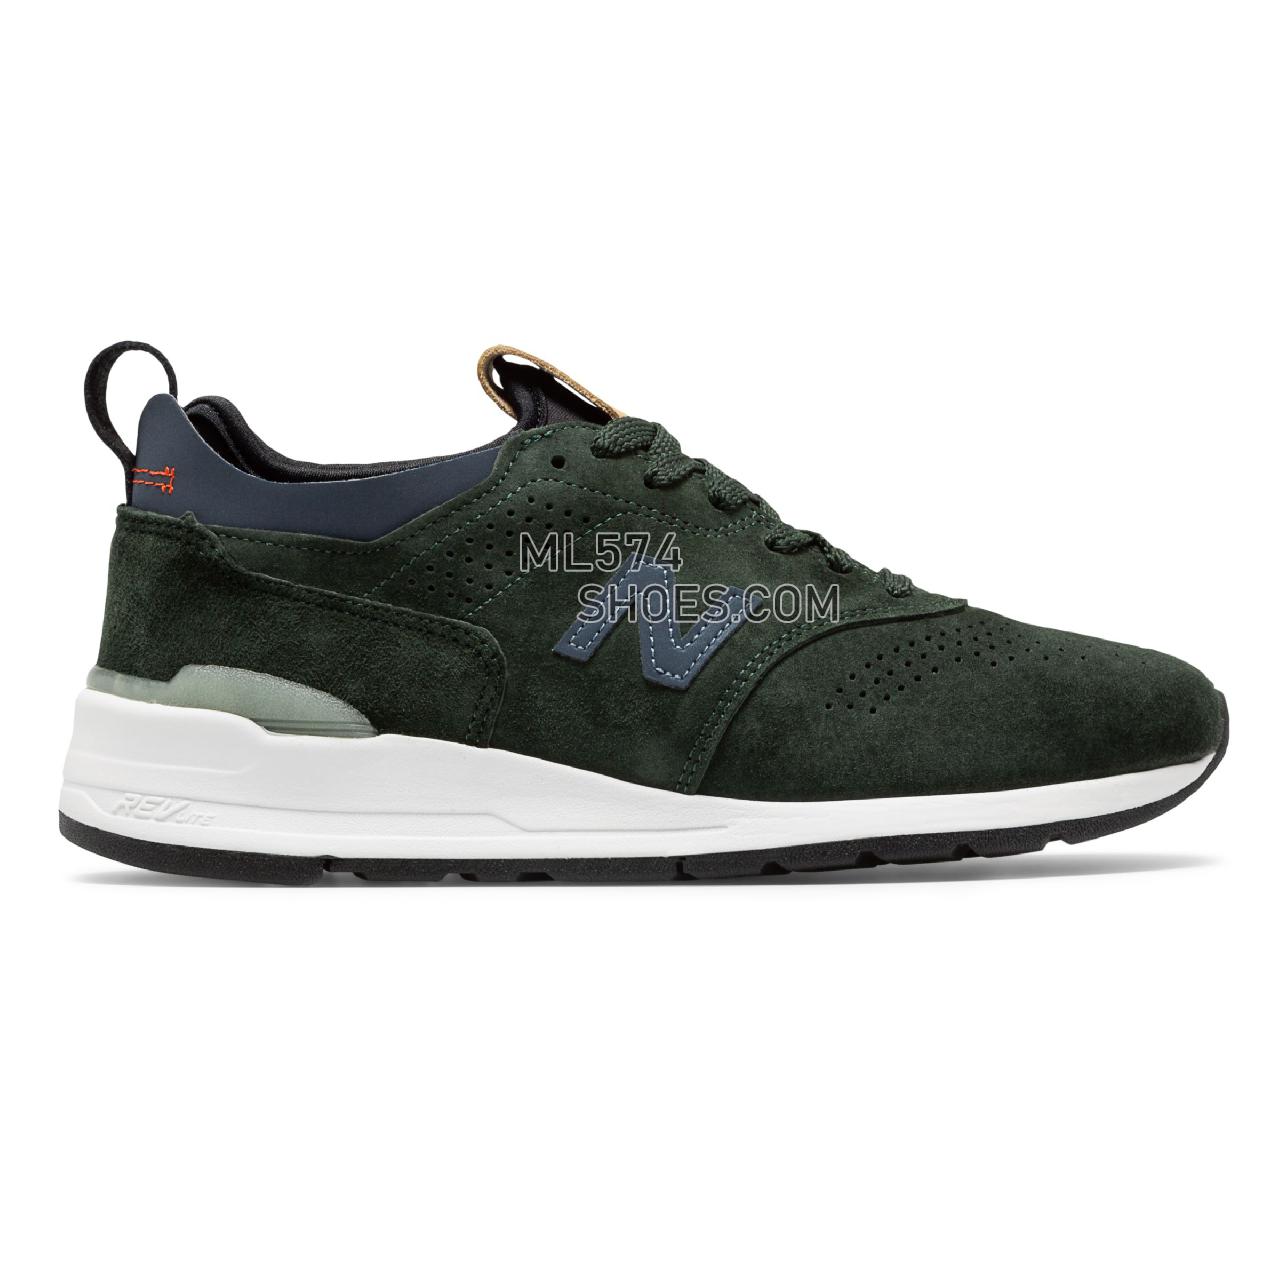 New Balance 997R - Men's 997 - Classic Green with Blue - M997HB2